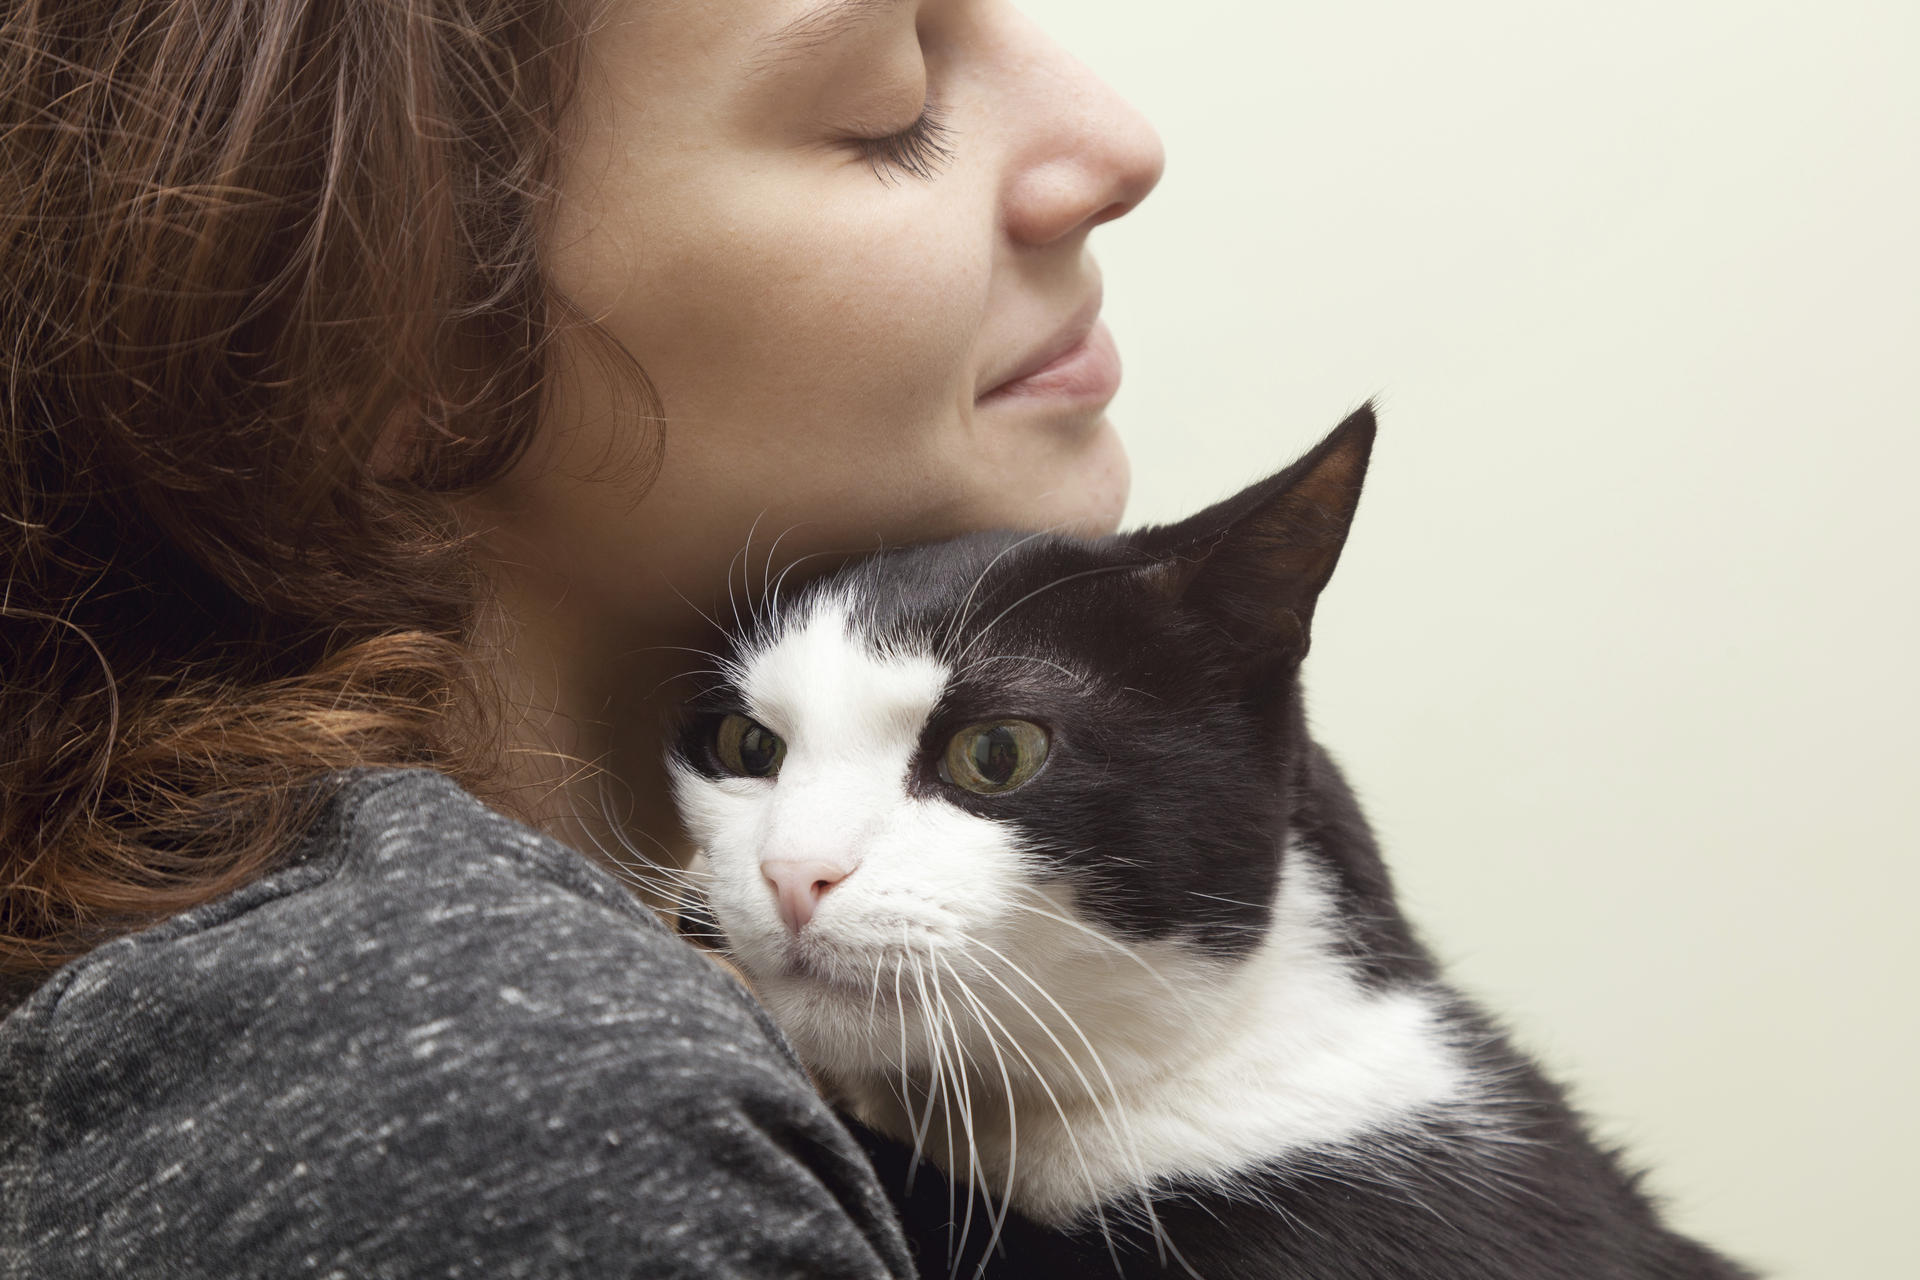 It's important for pet owners to get their animals accustomed to being handled by humans beyond petting, so that they can tolerate grooming and veterinary check-ups. Photos: Thinkstock